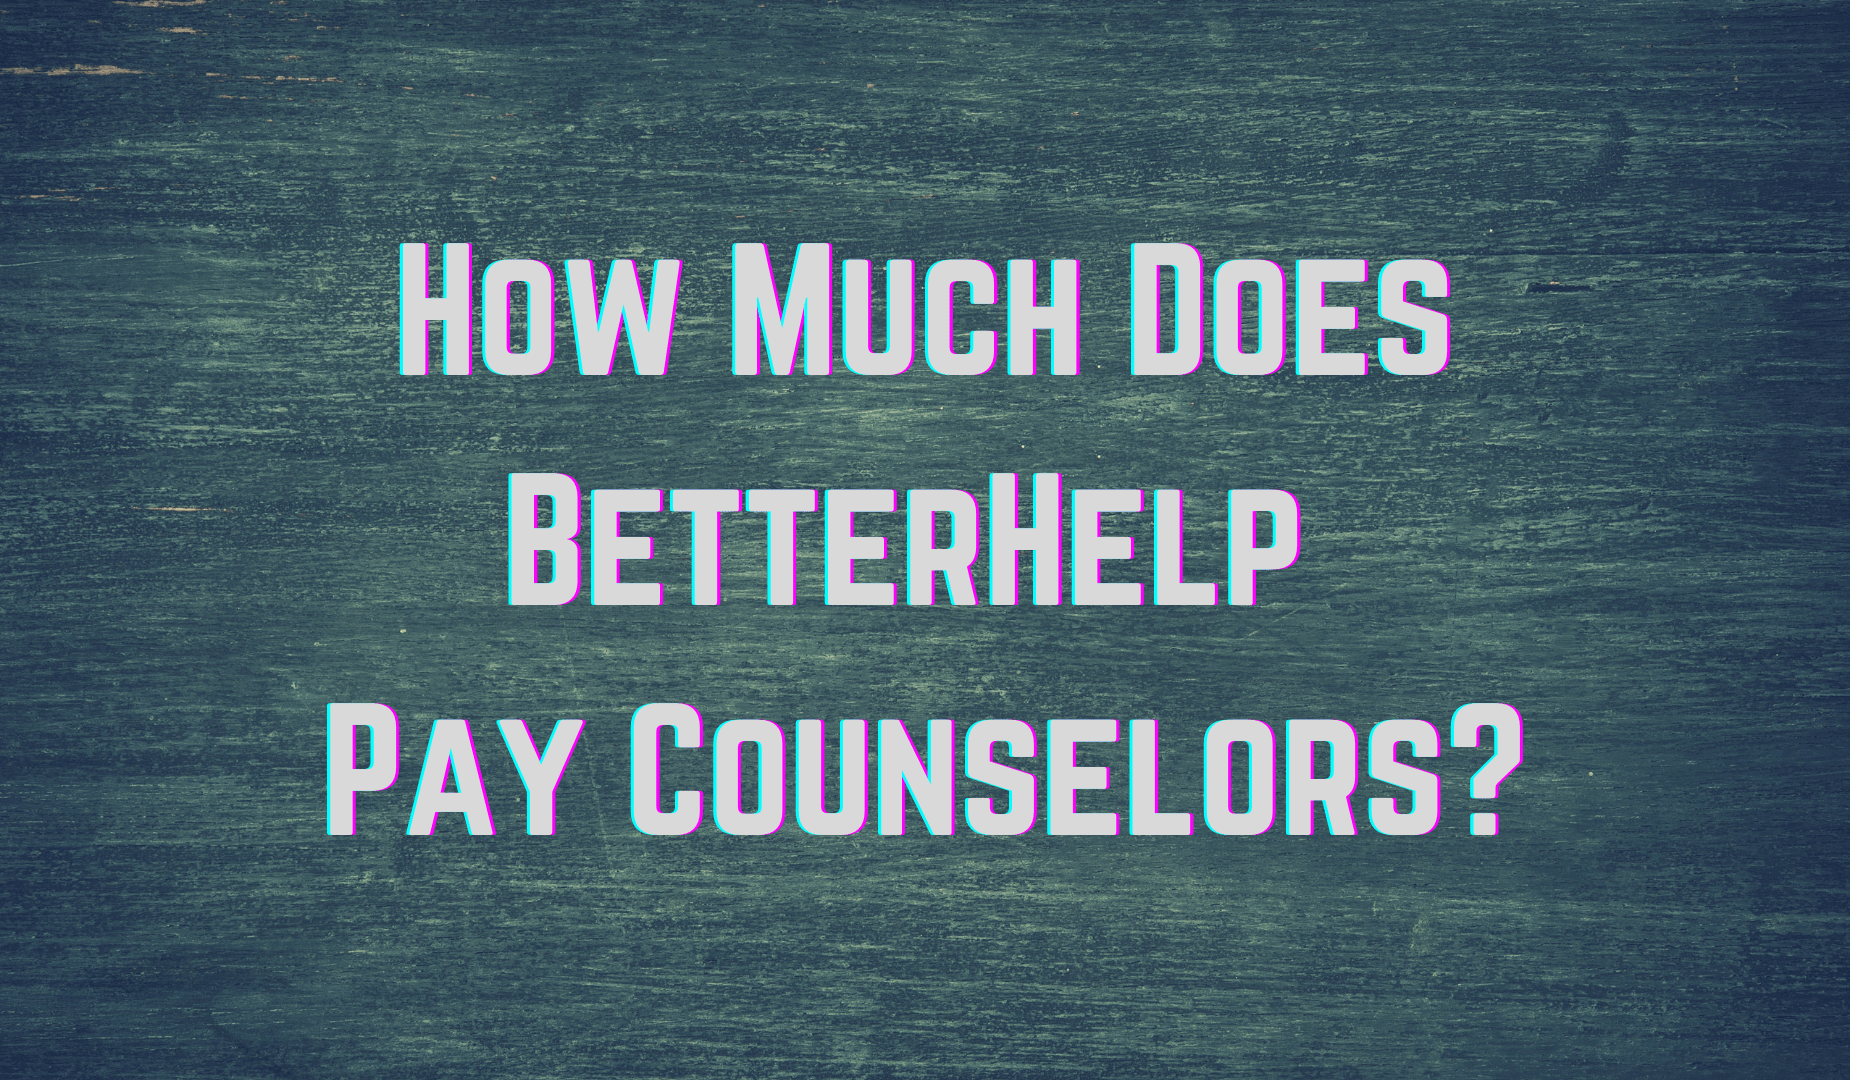 How Much Does BetterHelp Pay Counselors?